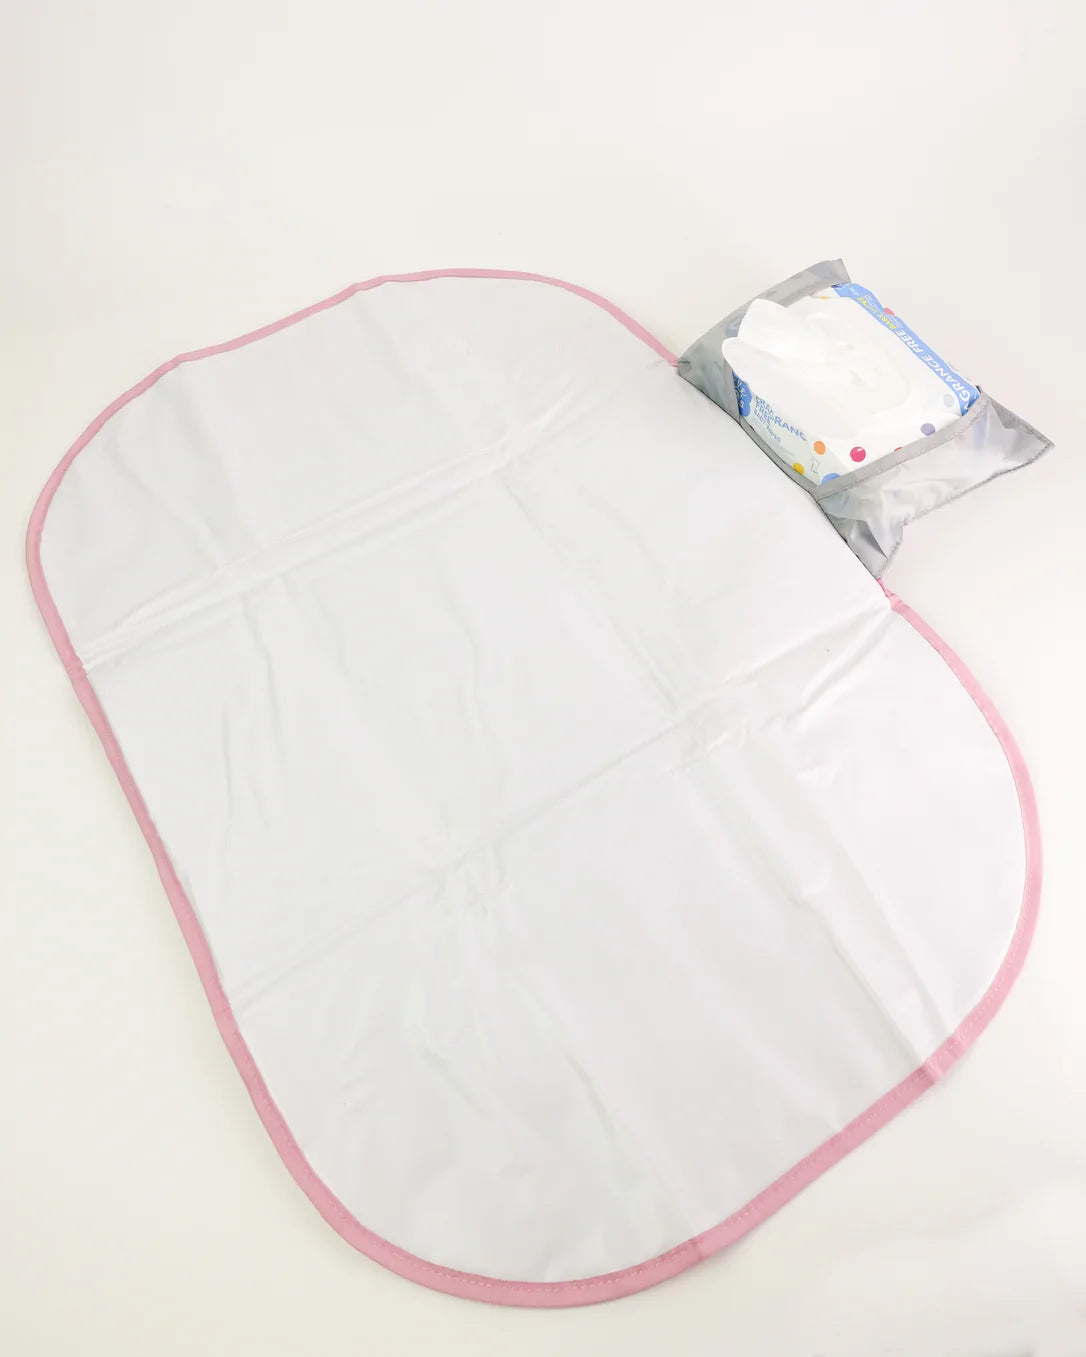 THE SOMEWHERE CO TRAVEL BABY CHANGE MAT - HERE COMES THE SUN